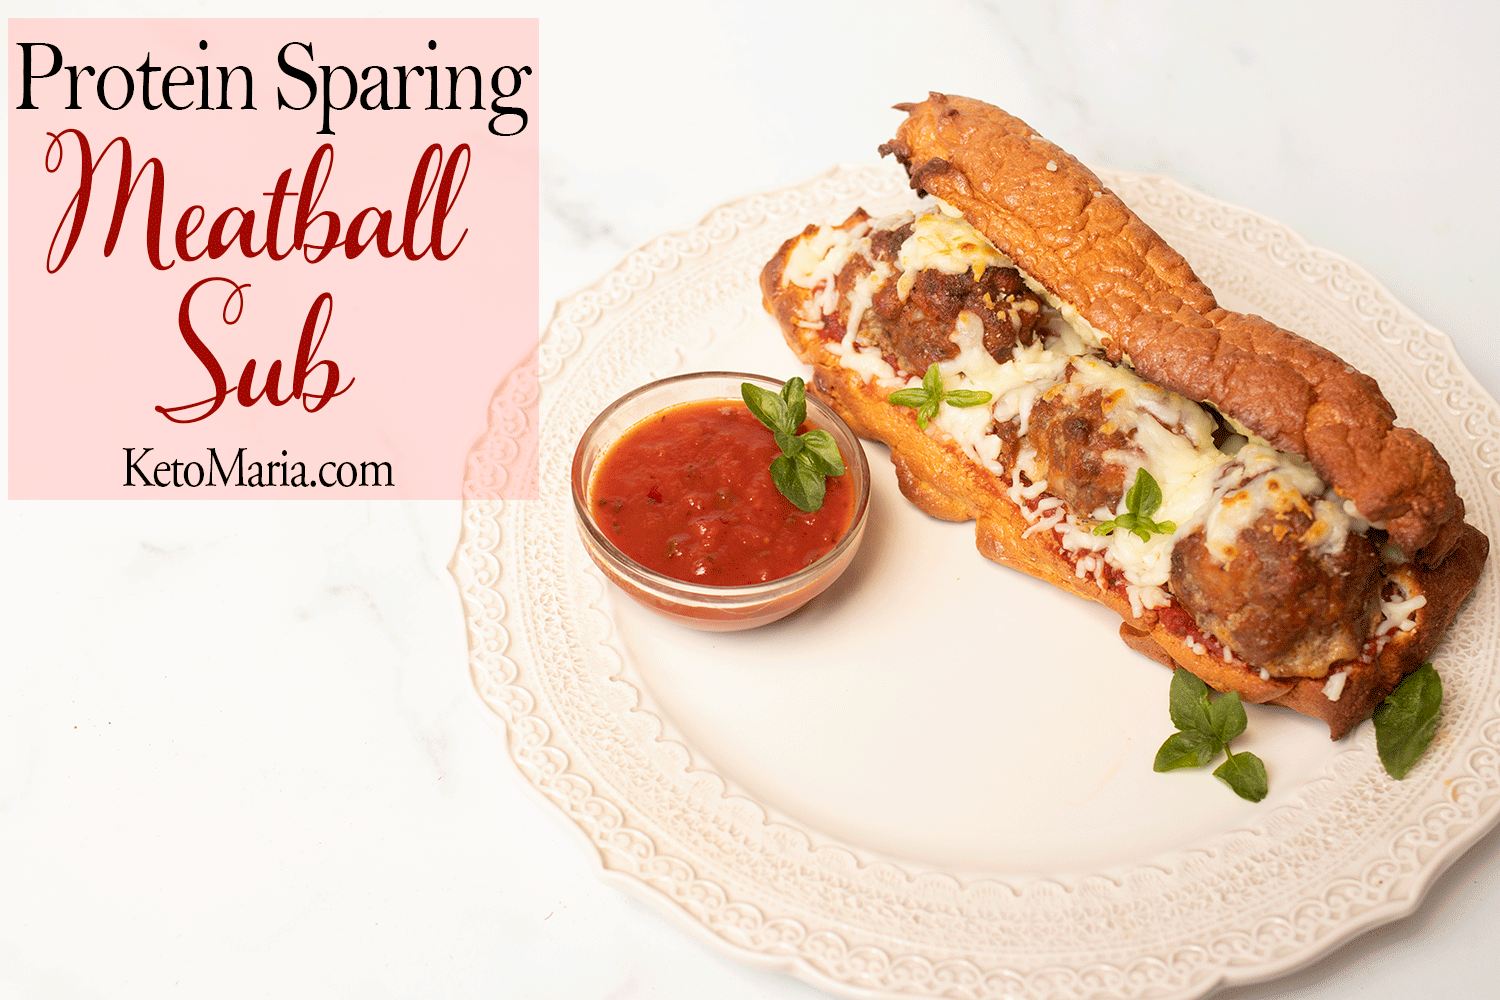 Protein Sparing Meatball Sub